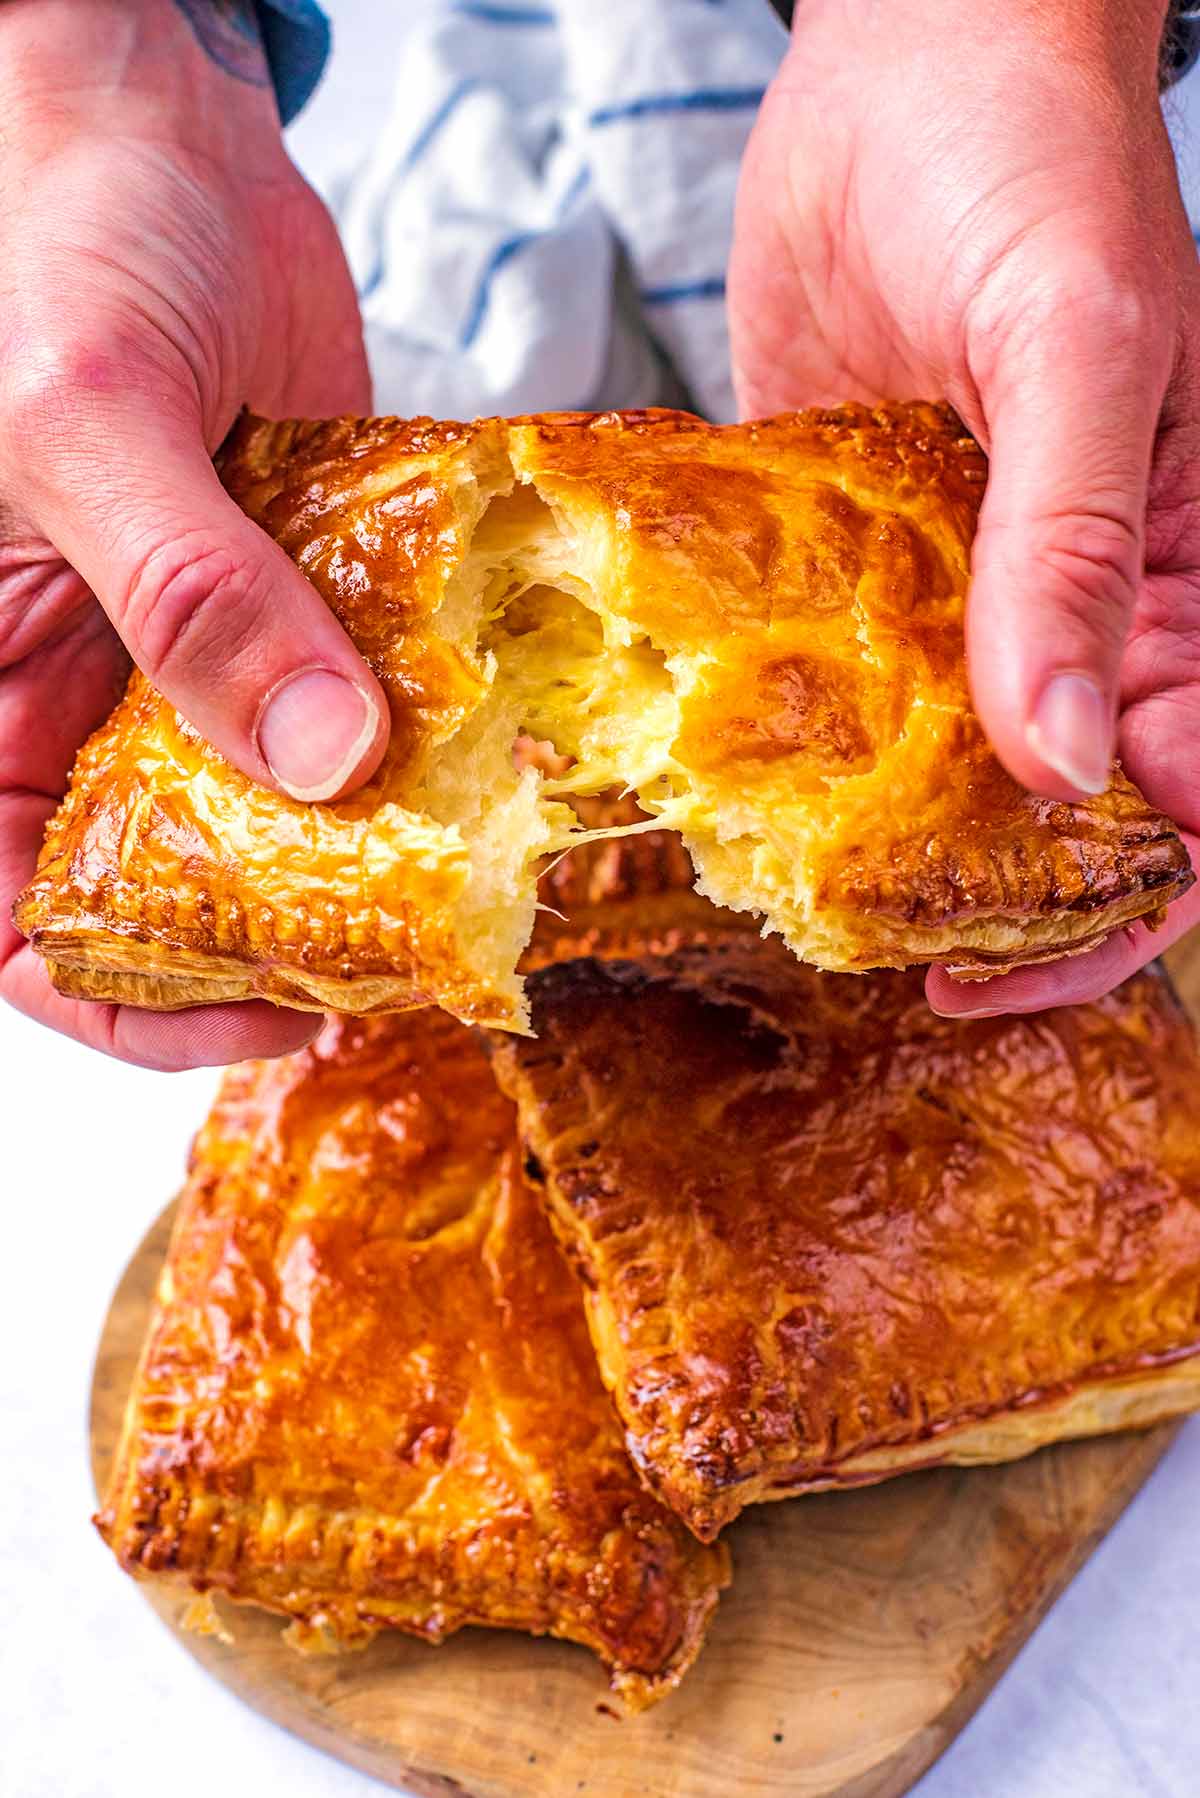 Two hands pulling apart a cheese and onion pasty showing the filling.